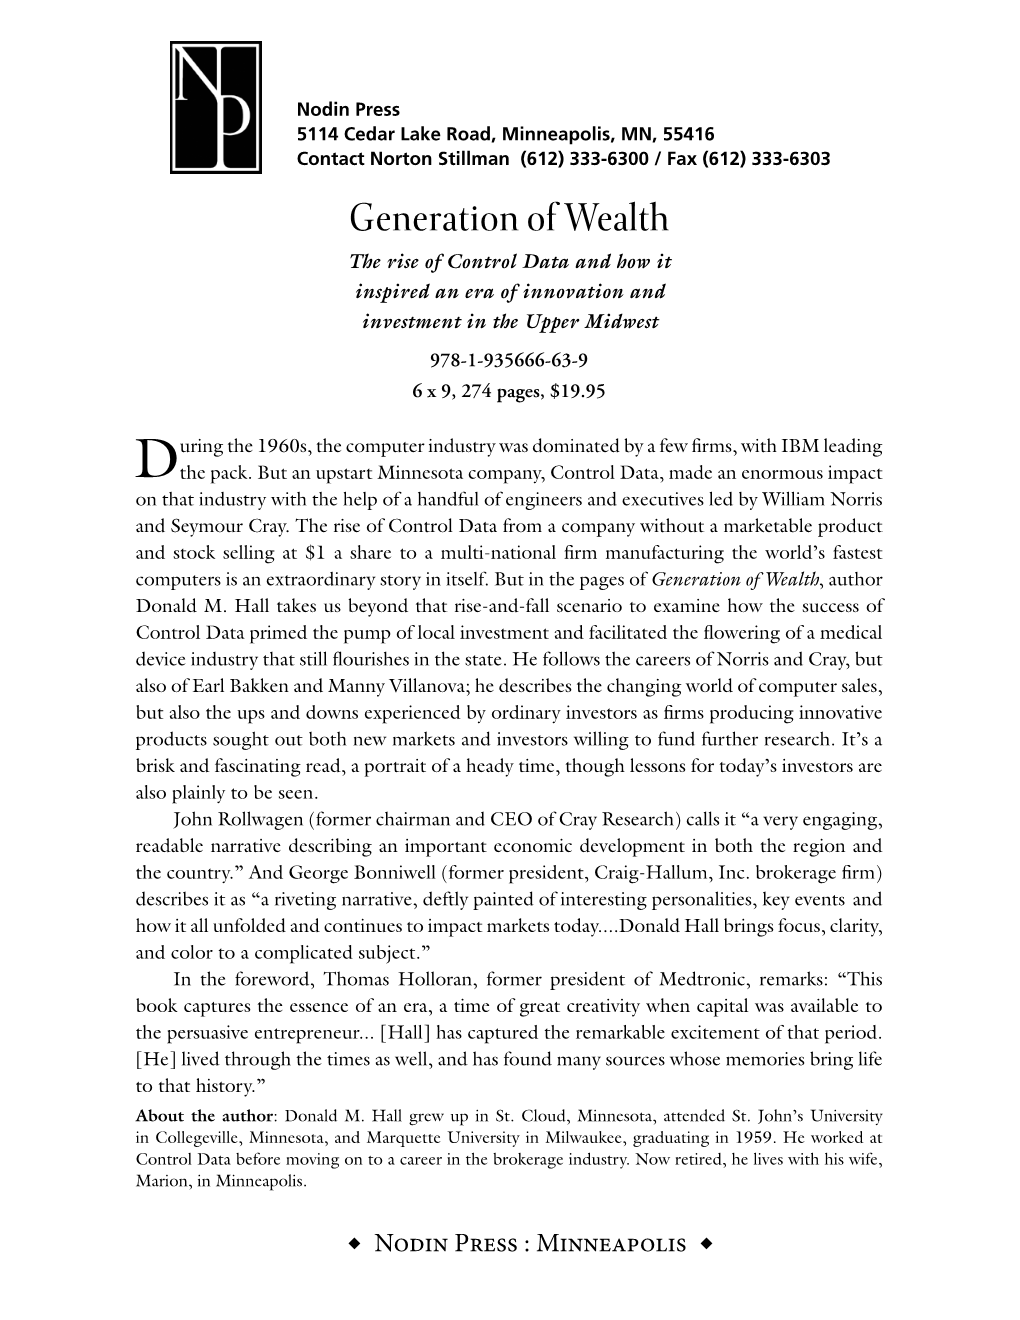 Generation of Wealth the Rise of Control Data and How It Inspired an Era of Innovation and Investment in the Upper Midwest 978-1-935666-63-9 6 X 9, 274 Pages, $19.95